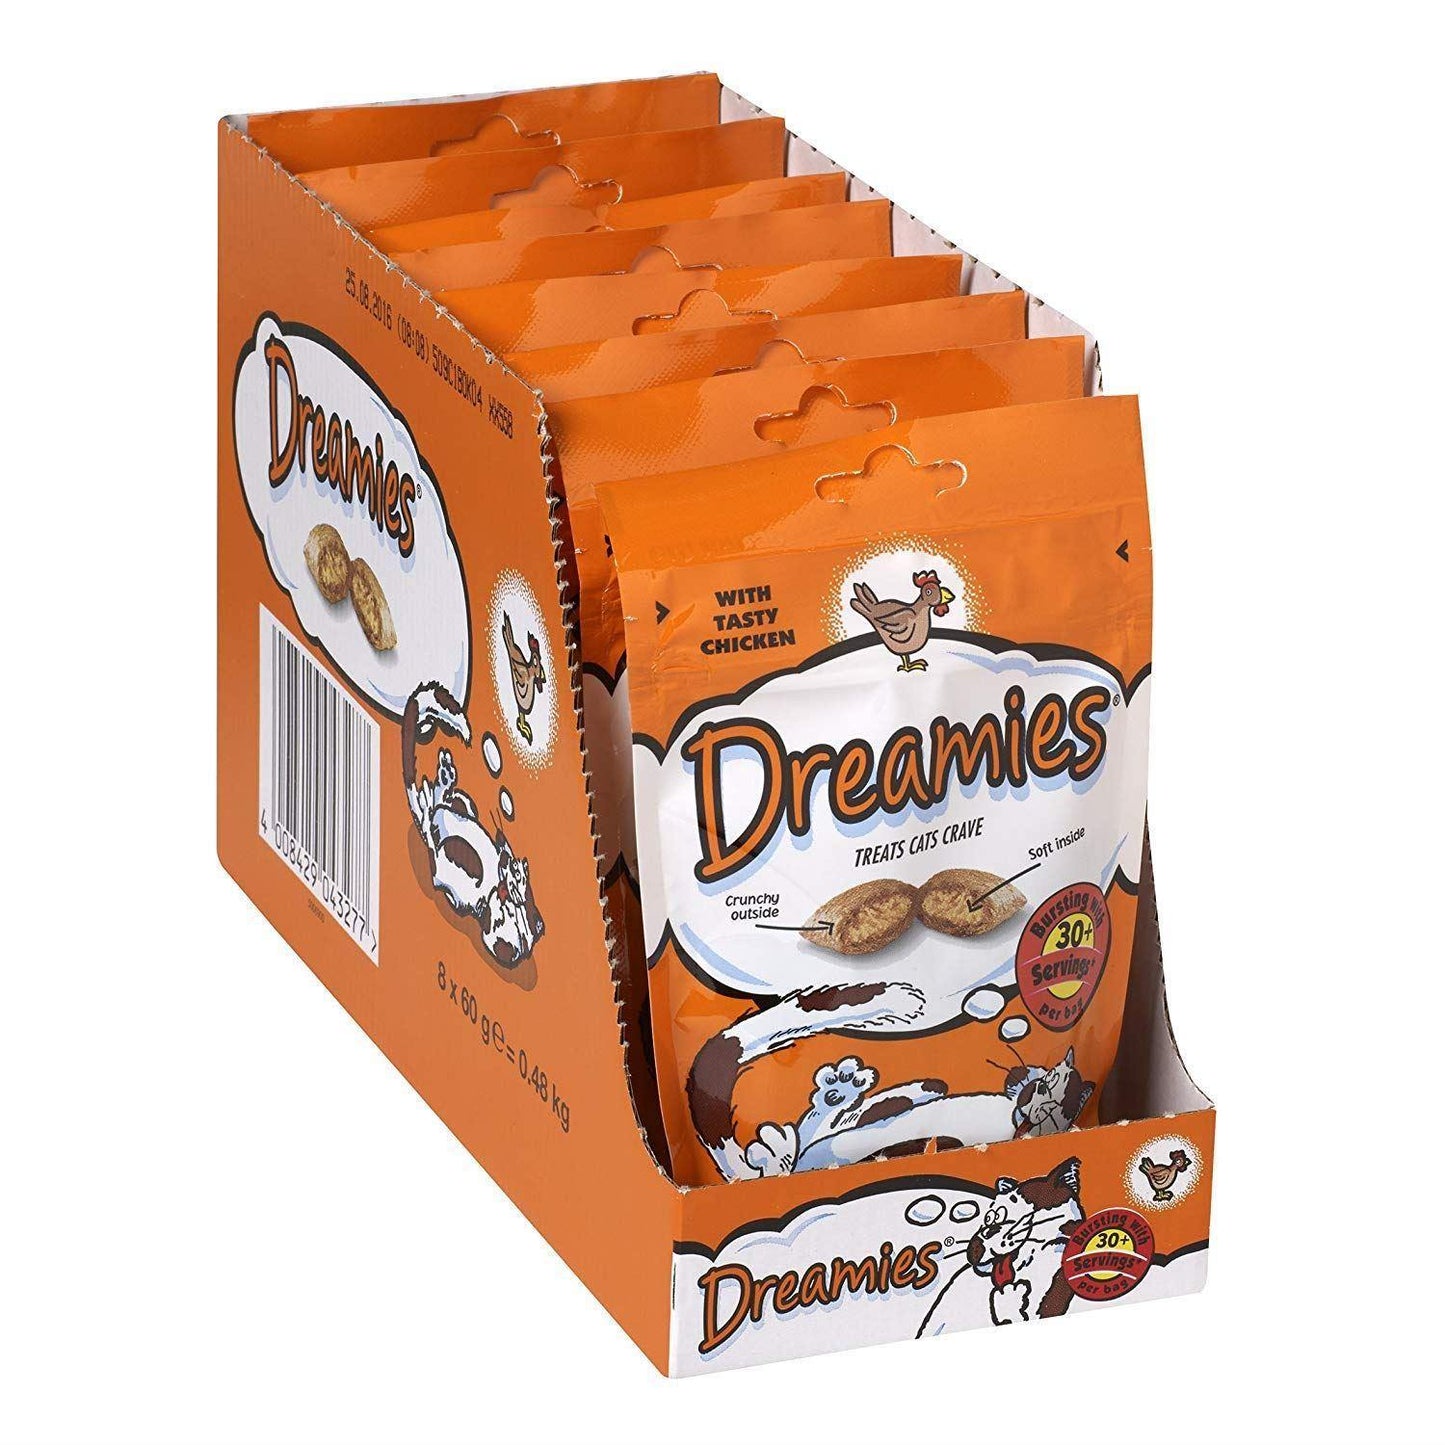 Dreamies Cat Treats with Chicken 60g (Box of 8)